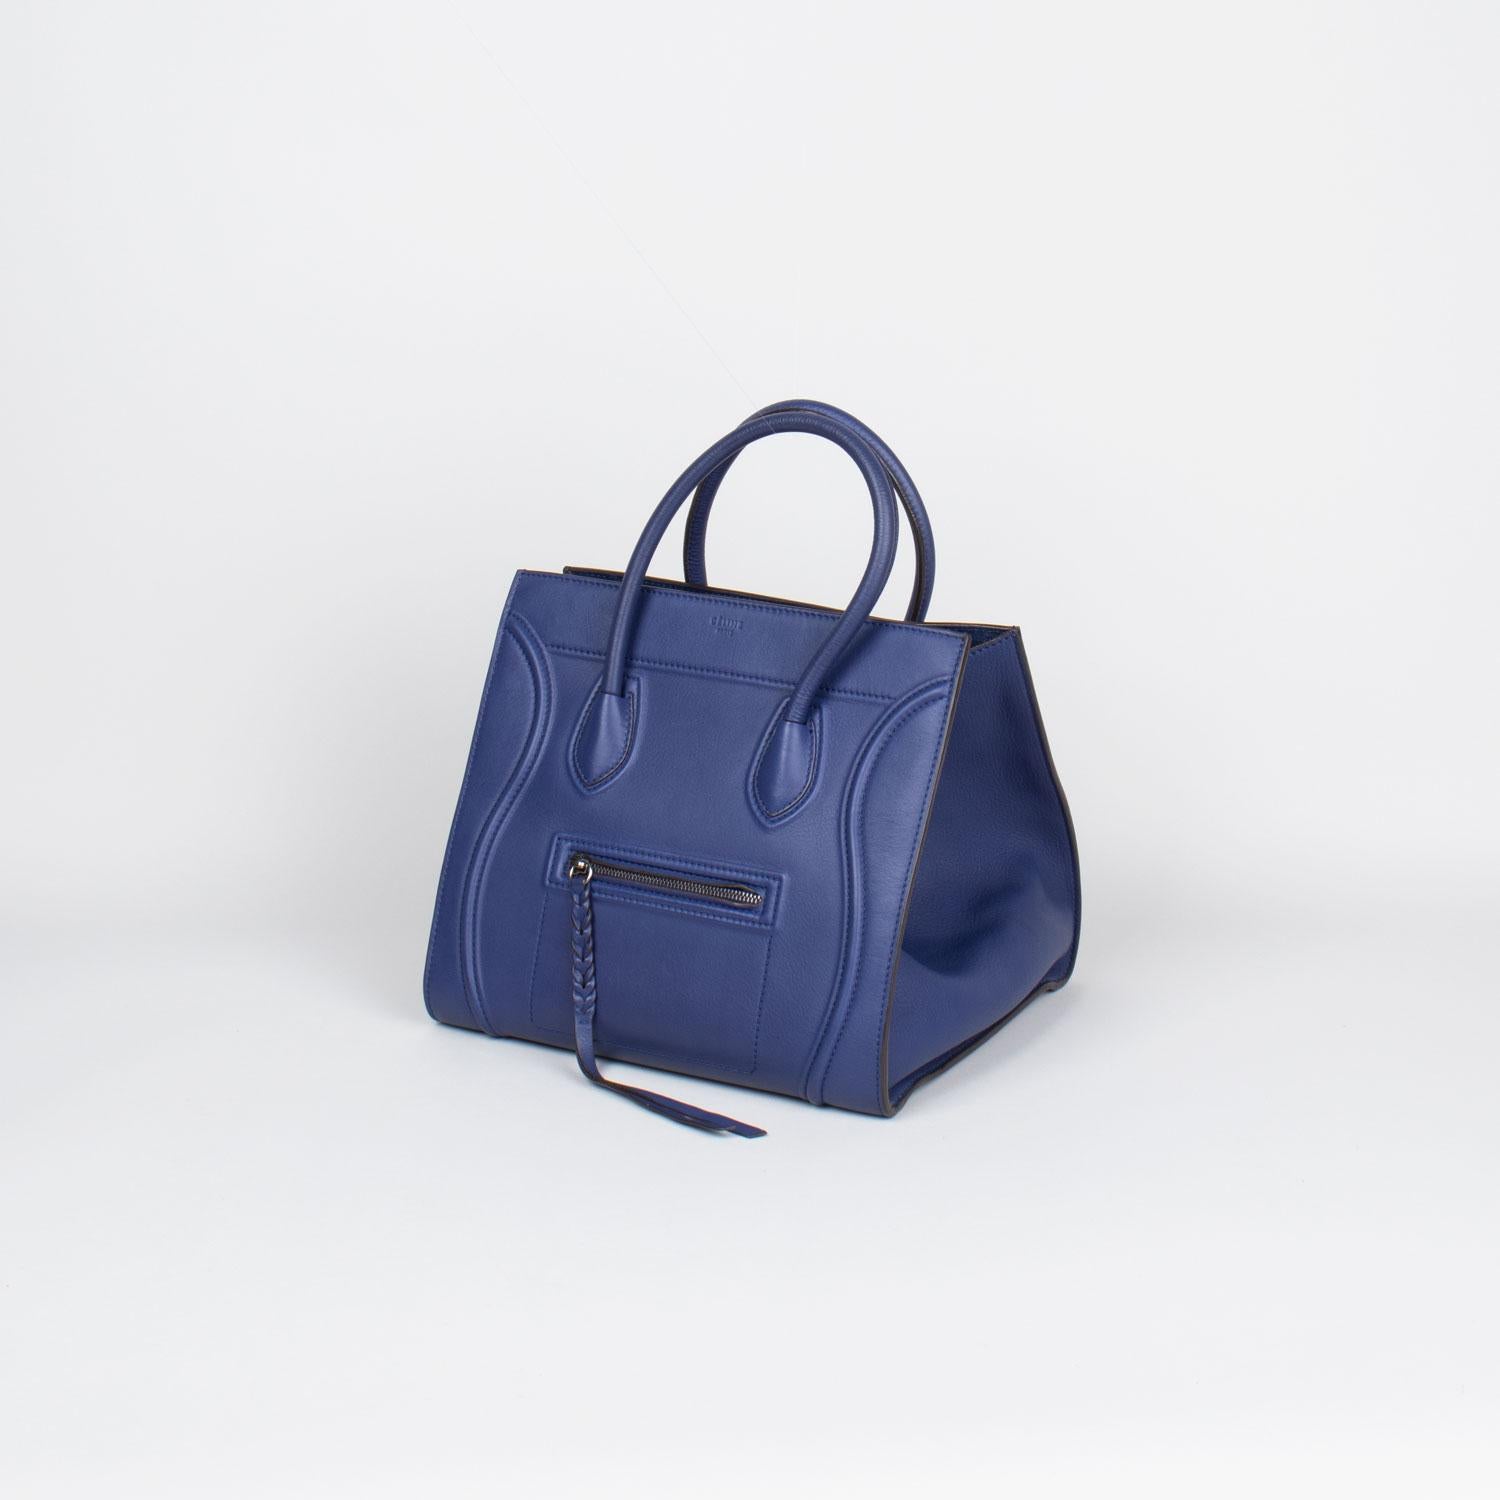 From the Winter 2014 Collection by Phoebe Philo. Navy drummed calfskin leather Céline Medium Luggage Phantom tote with 

– Silver-tone hardware
– Dual rolled top handles
– Zip pocket at front
– Tonal trim throughout exterior
– tonal suede lining,